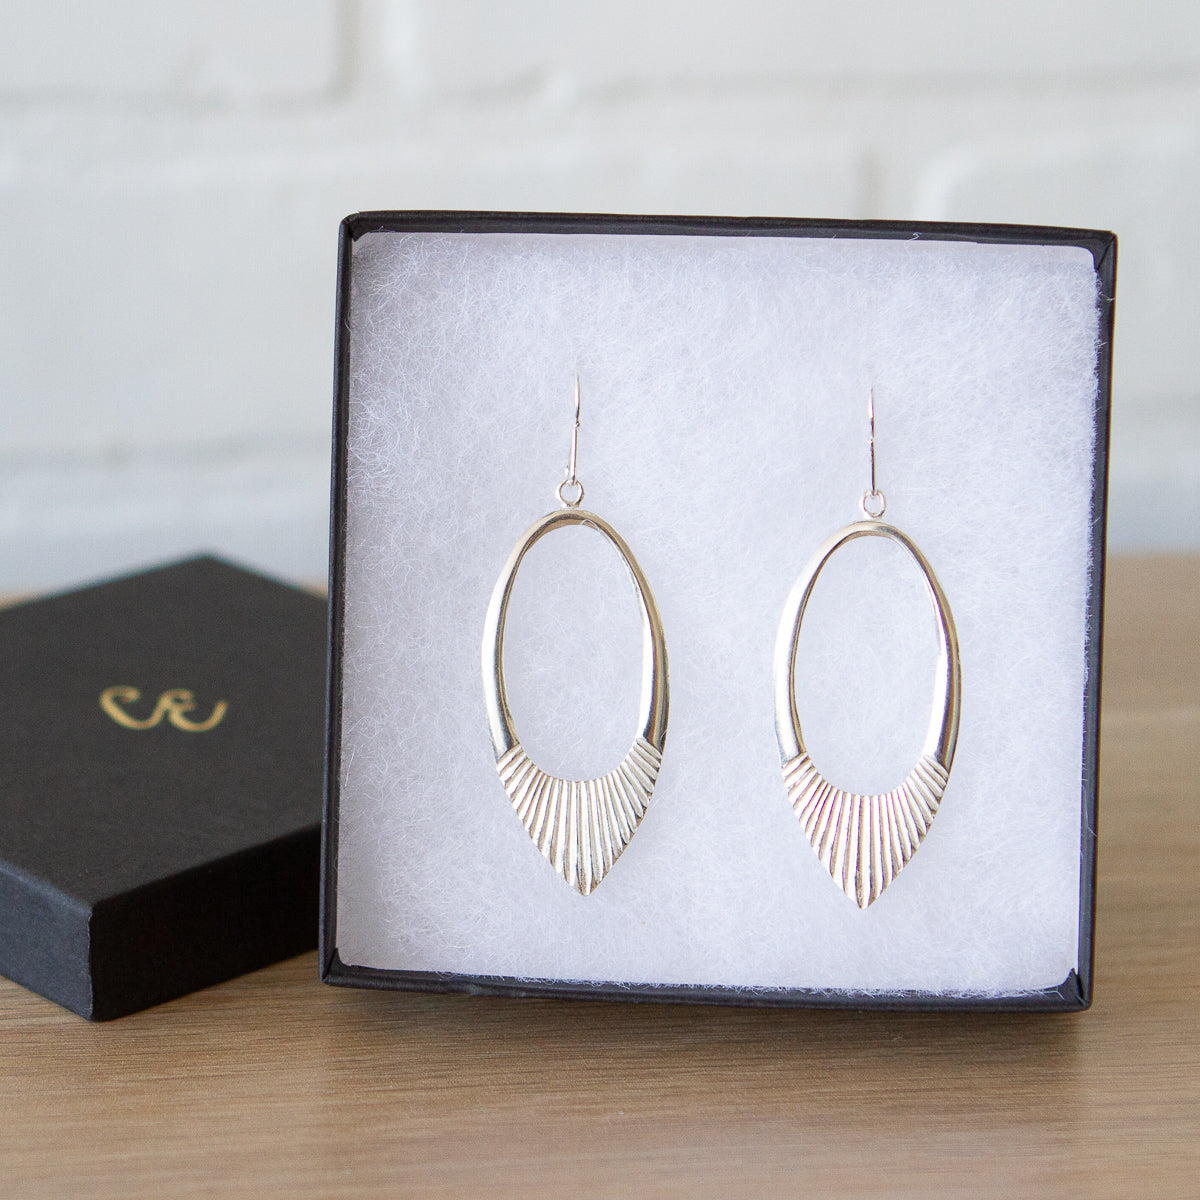 Silver large open petal shape earrings with textured bottoms in a gift box